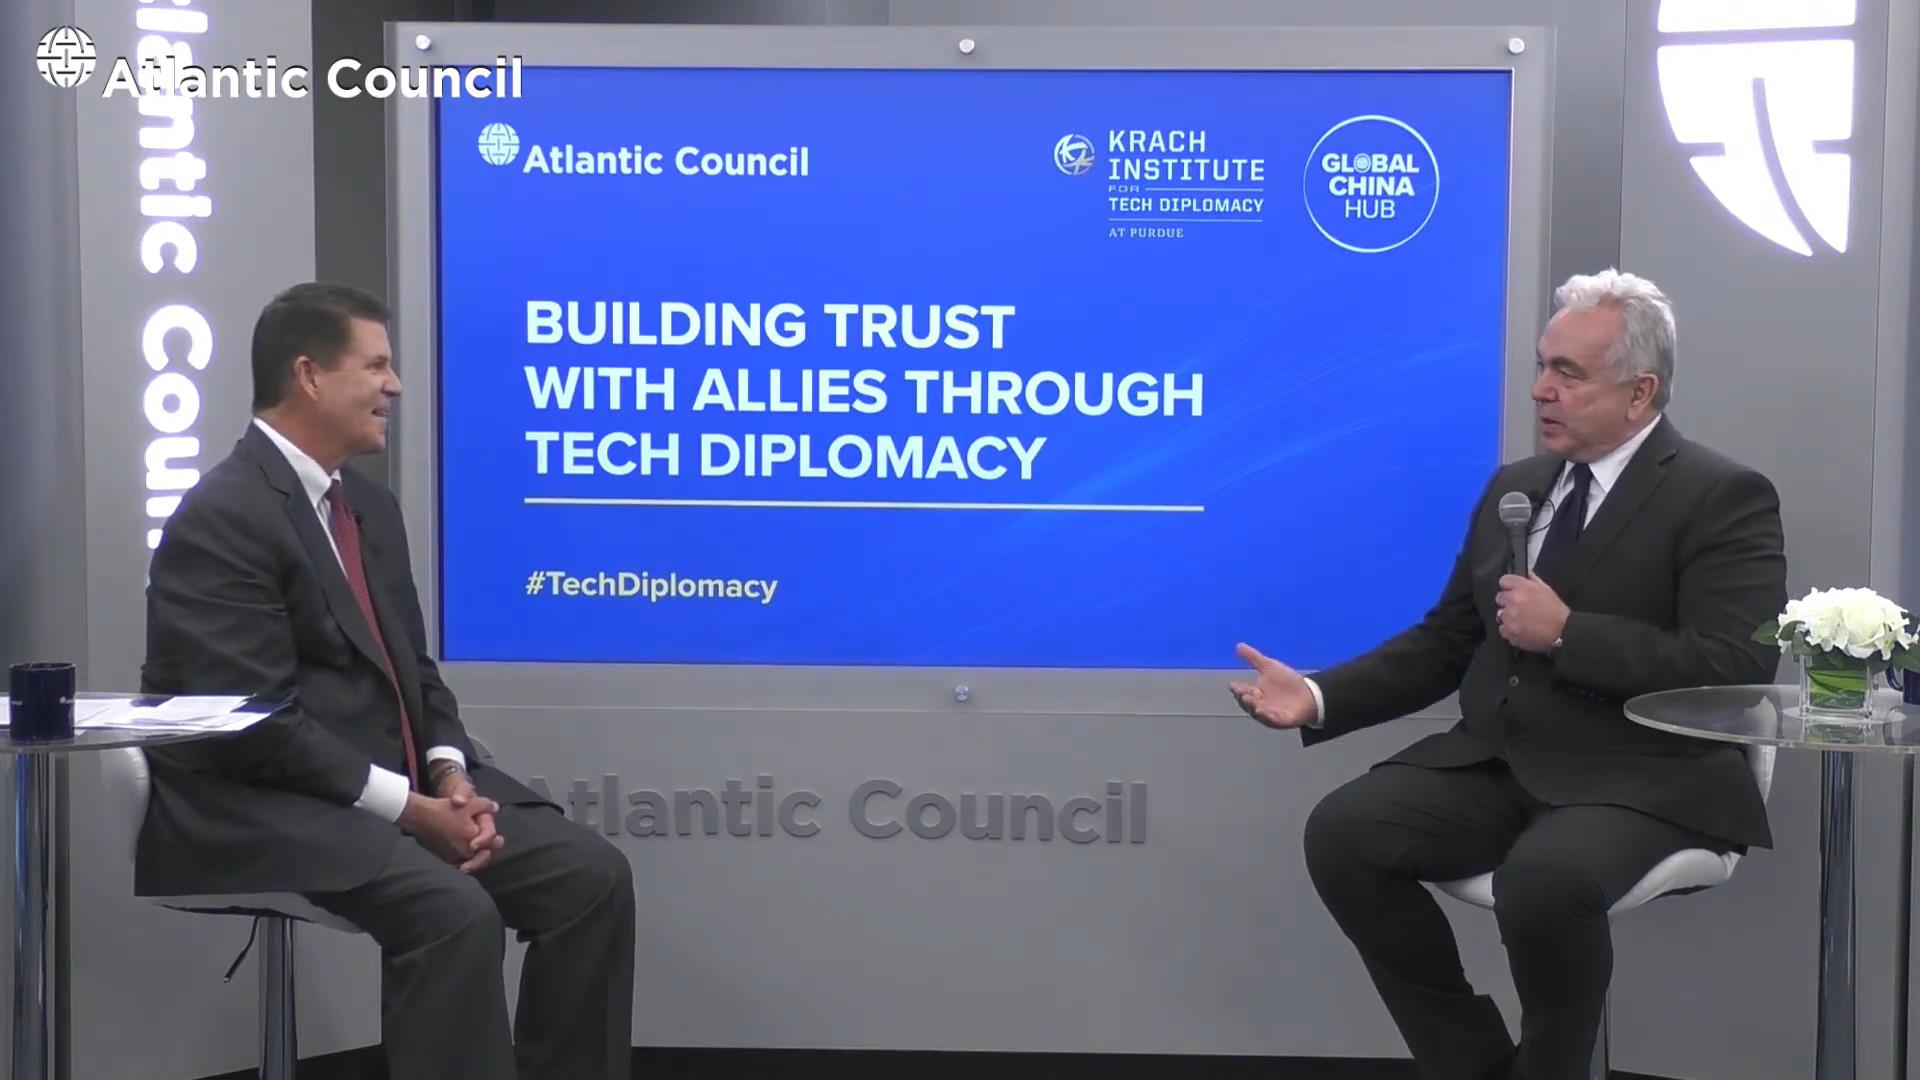 Keith Krach and Kurt Campbell discuss building trust with allies through trust principle